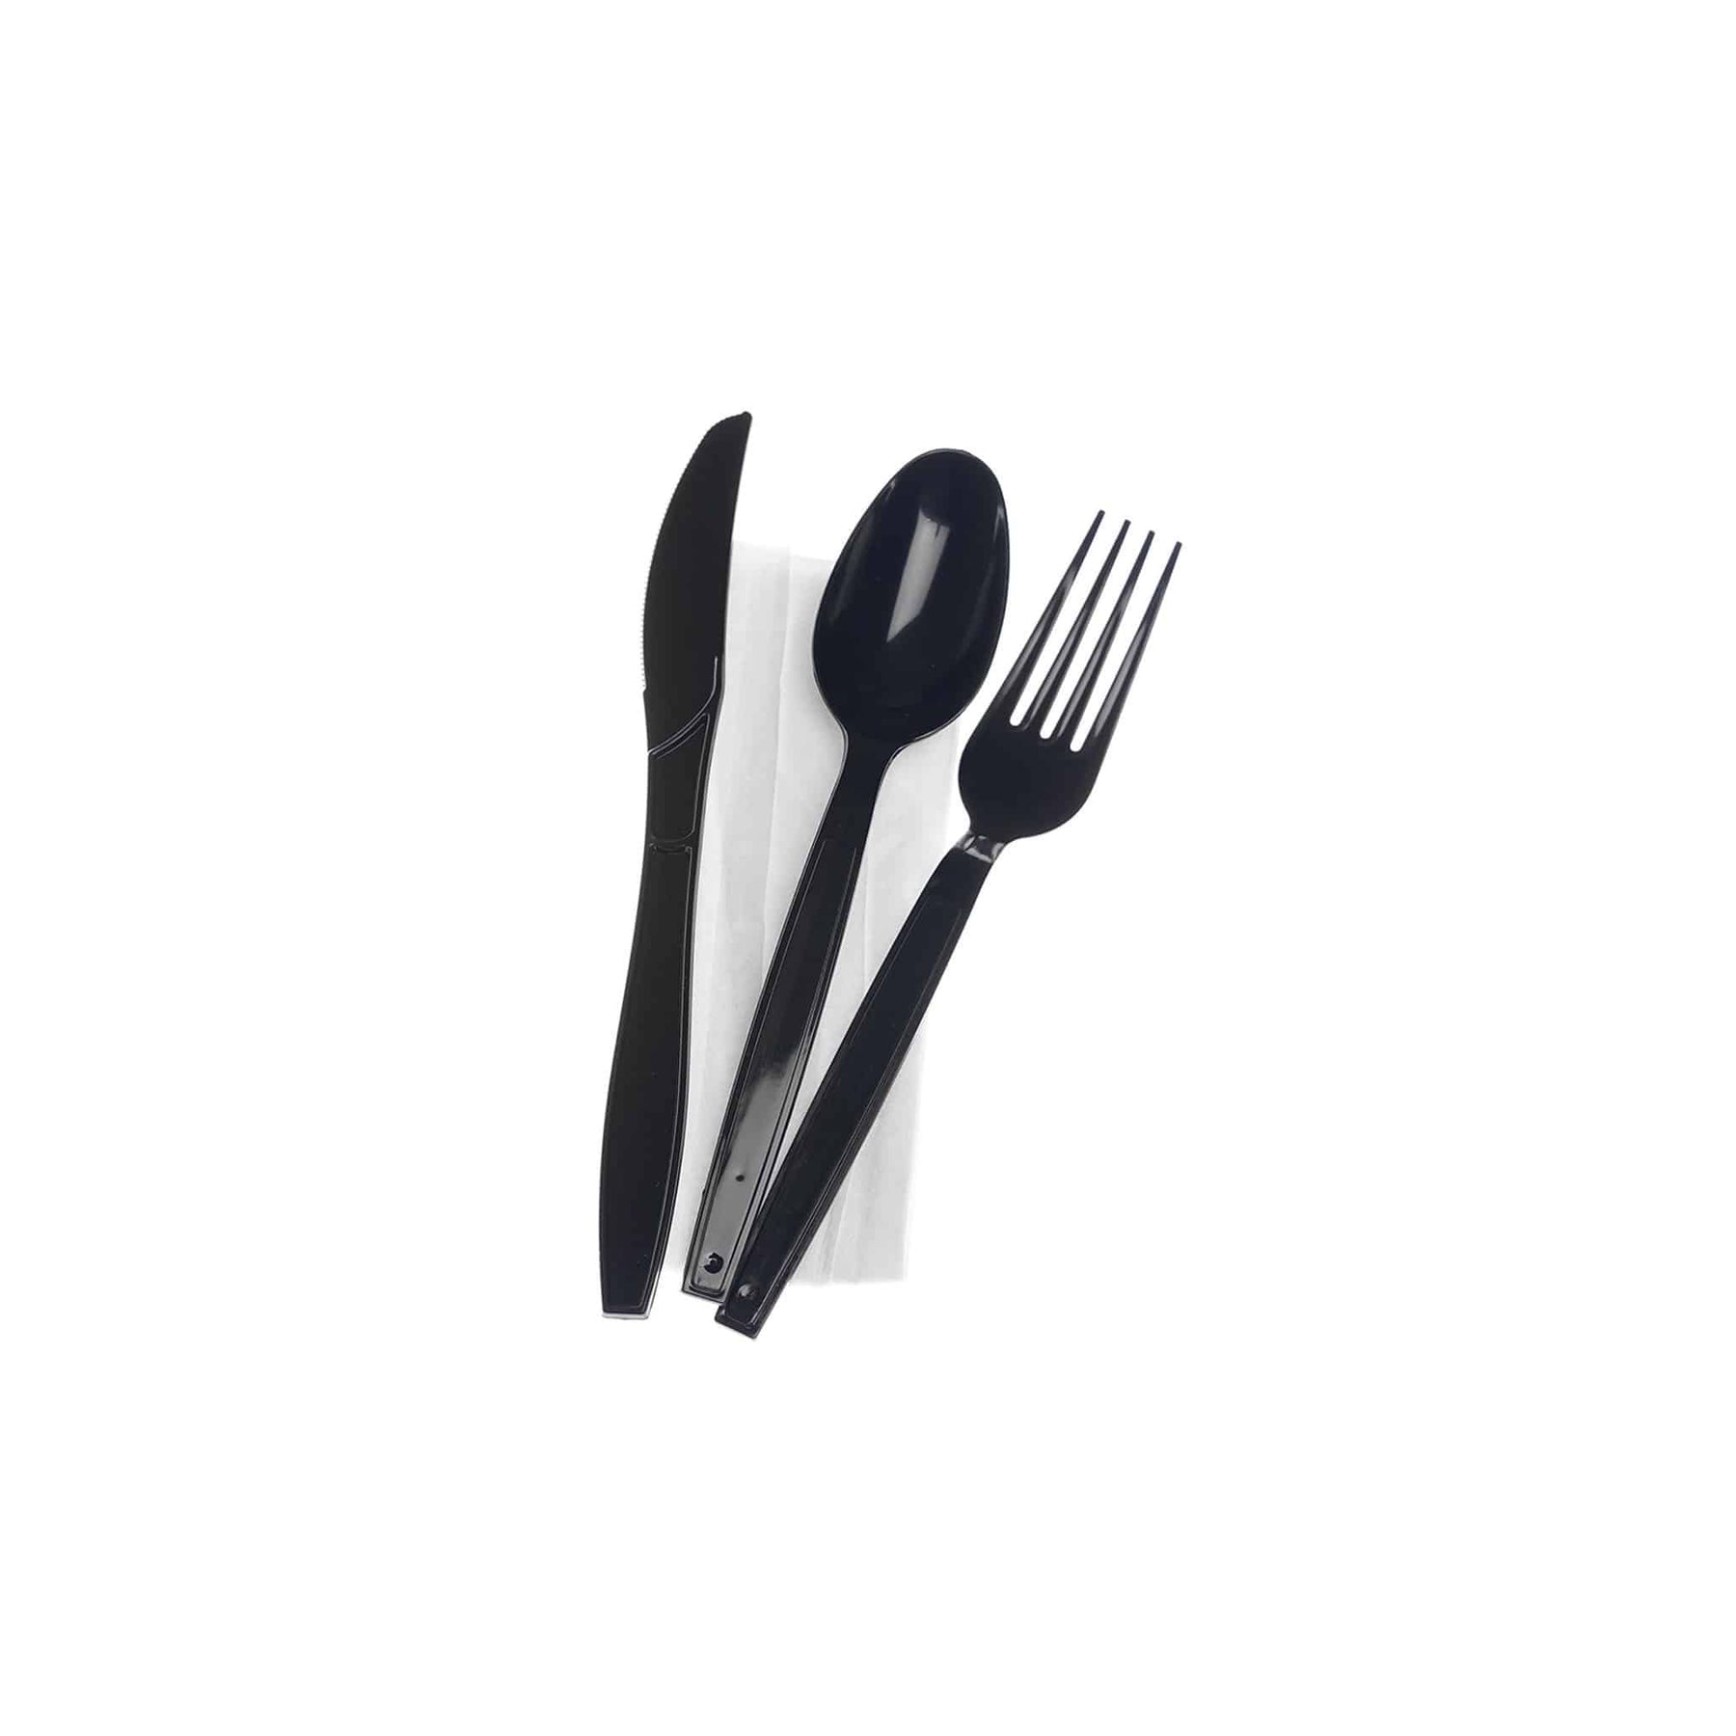 Black Cutlery set heavy duty Cutlery implies implements used for cutting and eating food. It includes knife, fork and spoon. There are different types of knives, forks and spoons. A complete cutlery set may include butter knife, soup spoon, seafood fork etc